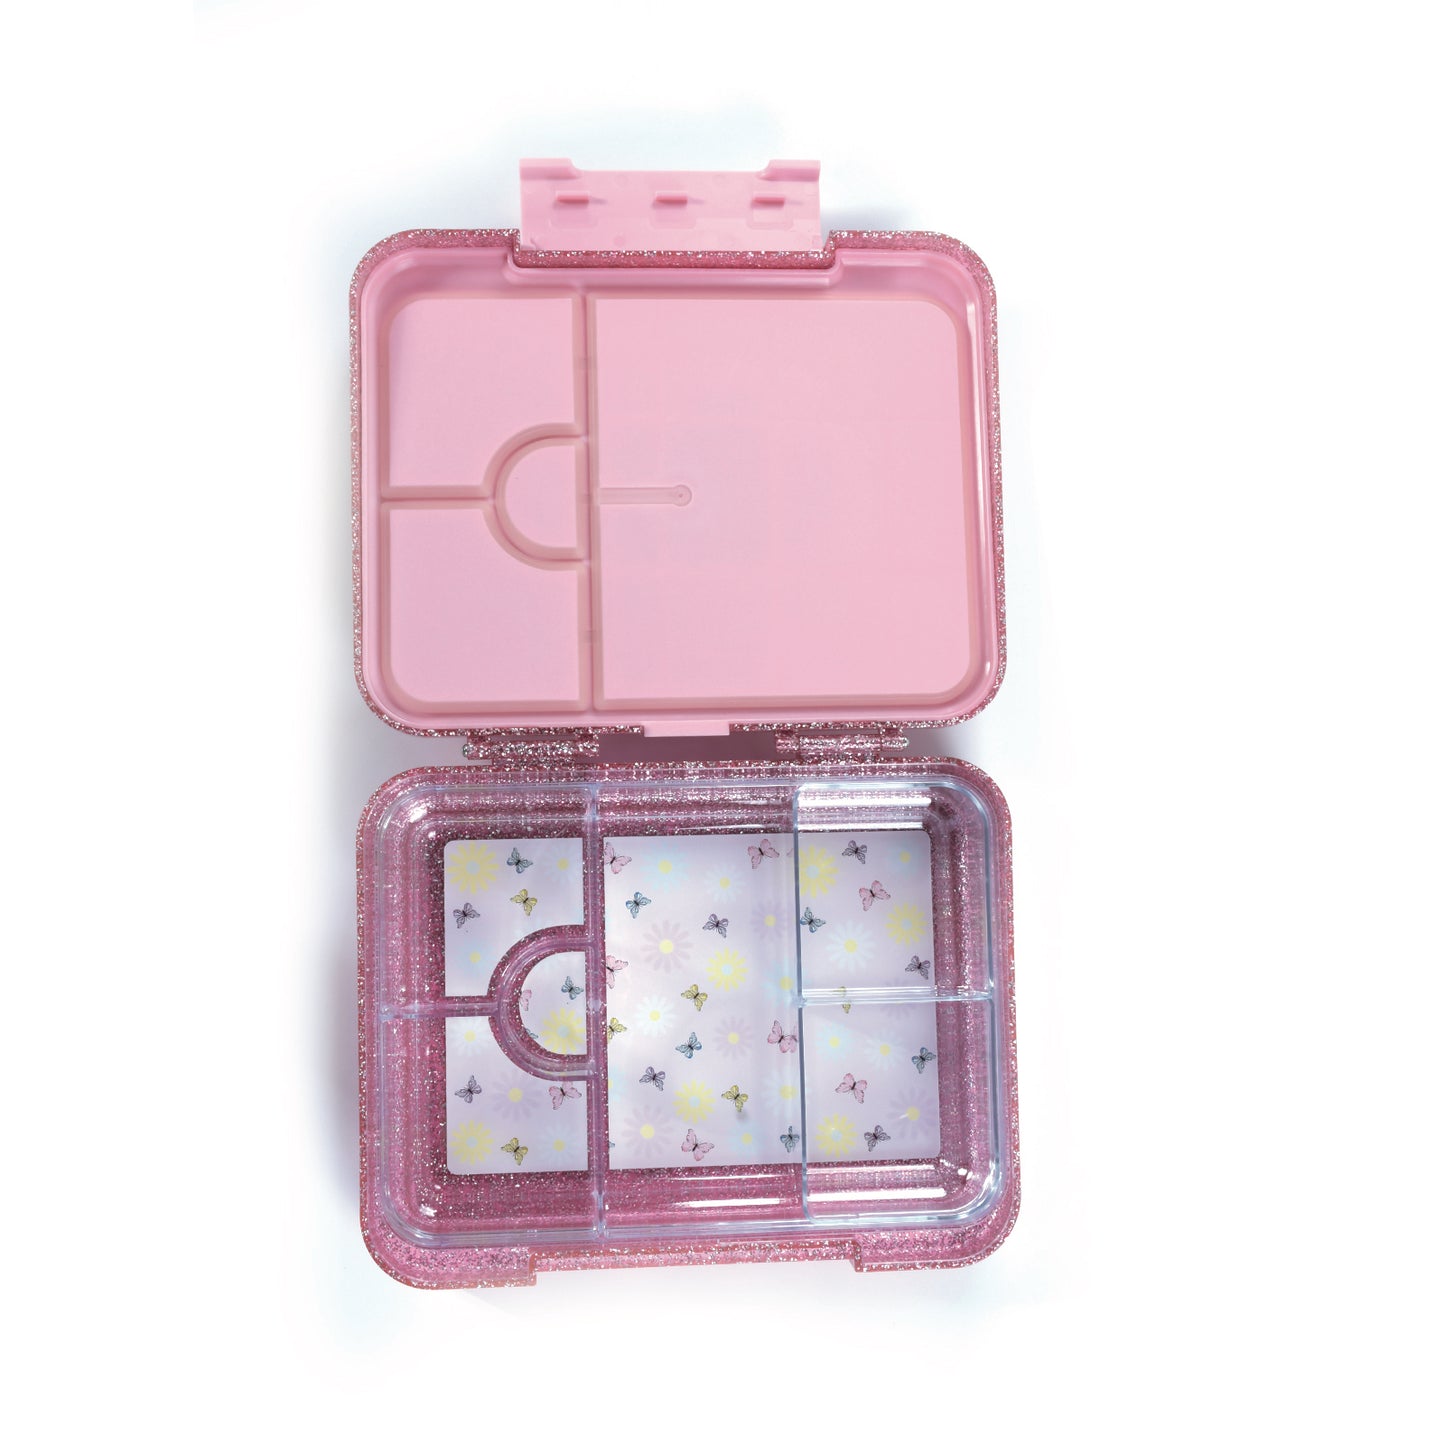 Essen Bento Large Lunch Box - Sparkle Pink Butterfly